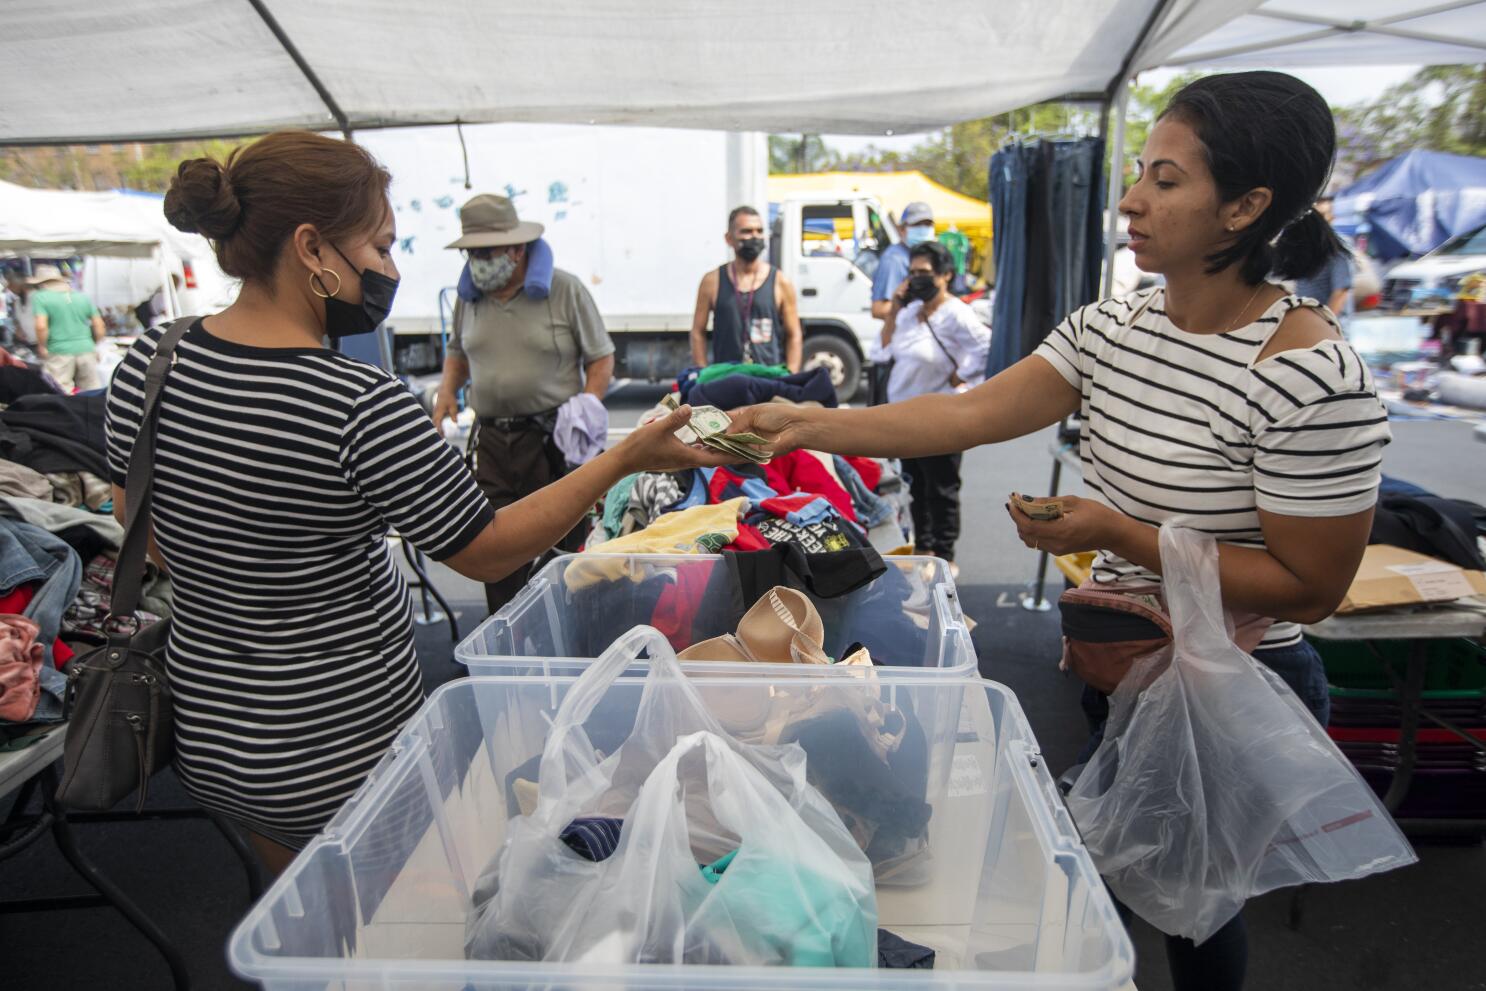 After COVID woes, L.A. City College swap meet will stay open - Los Angeles  Times